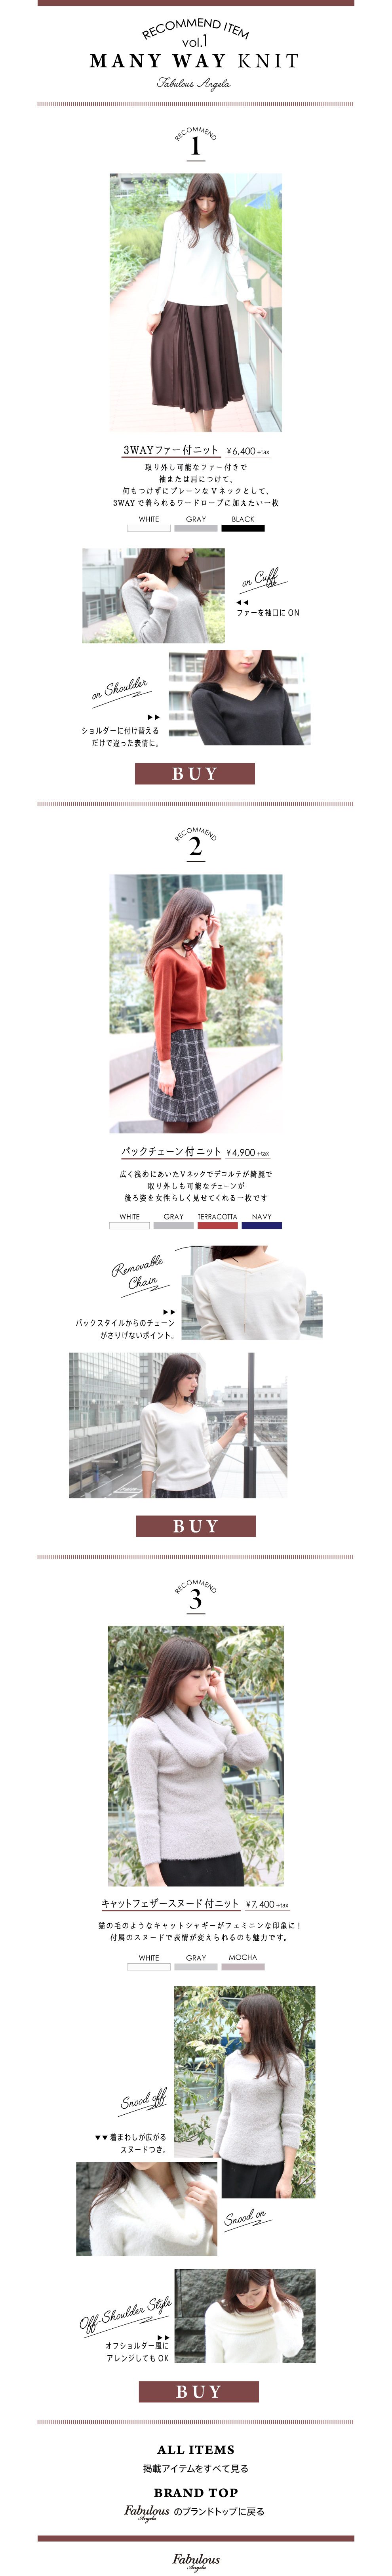 RECOMMEND ITEM vol.1 - MANY WAY KNIT